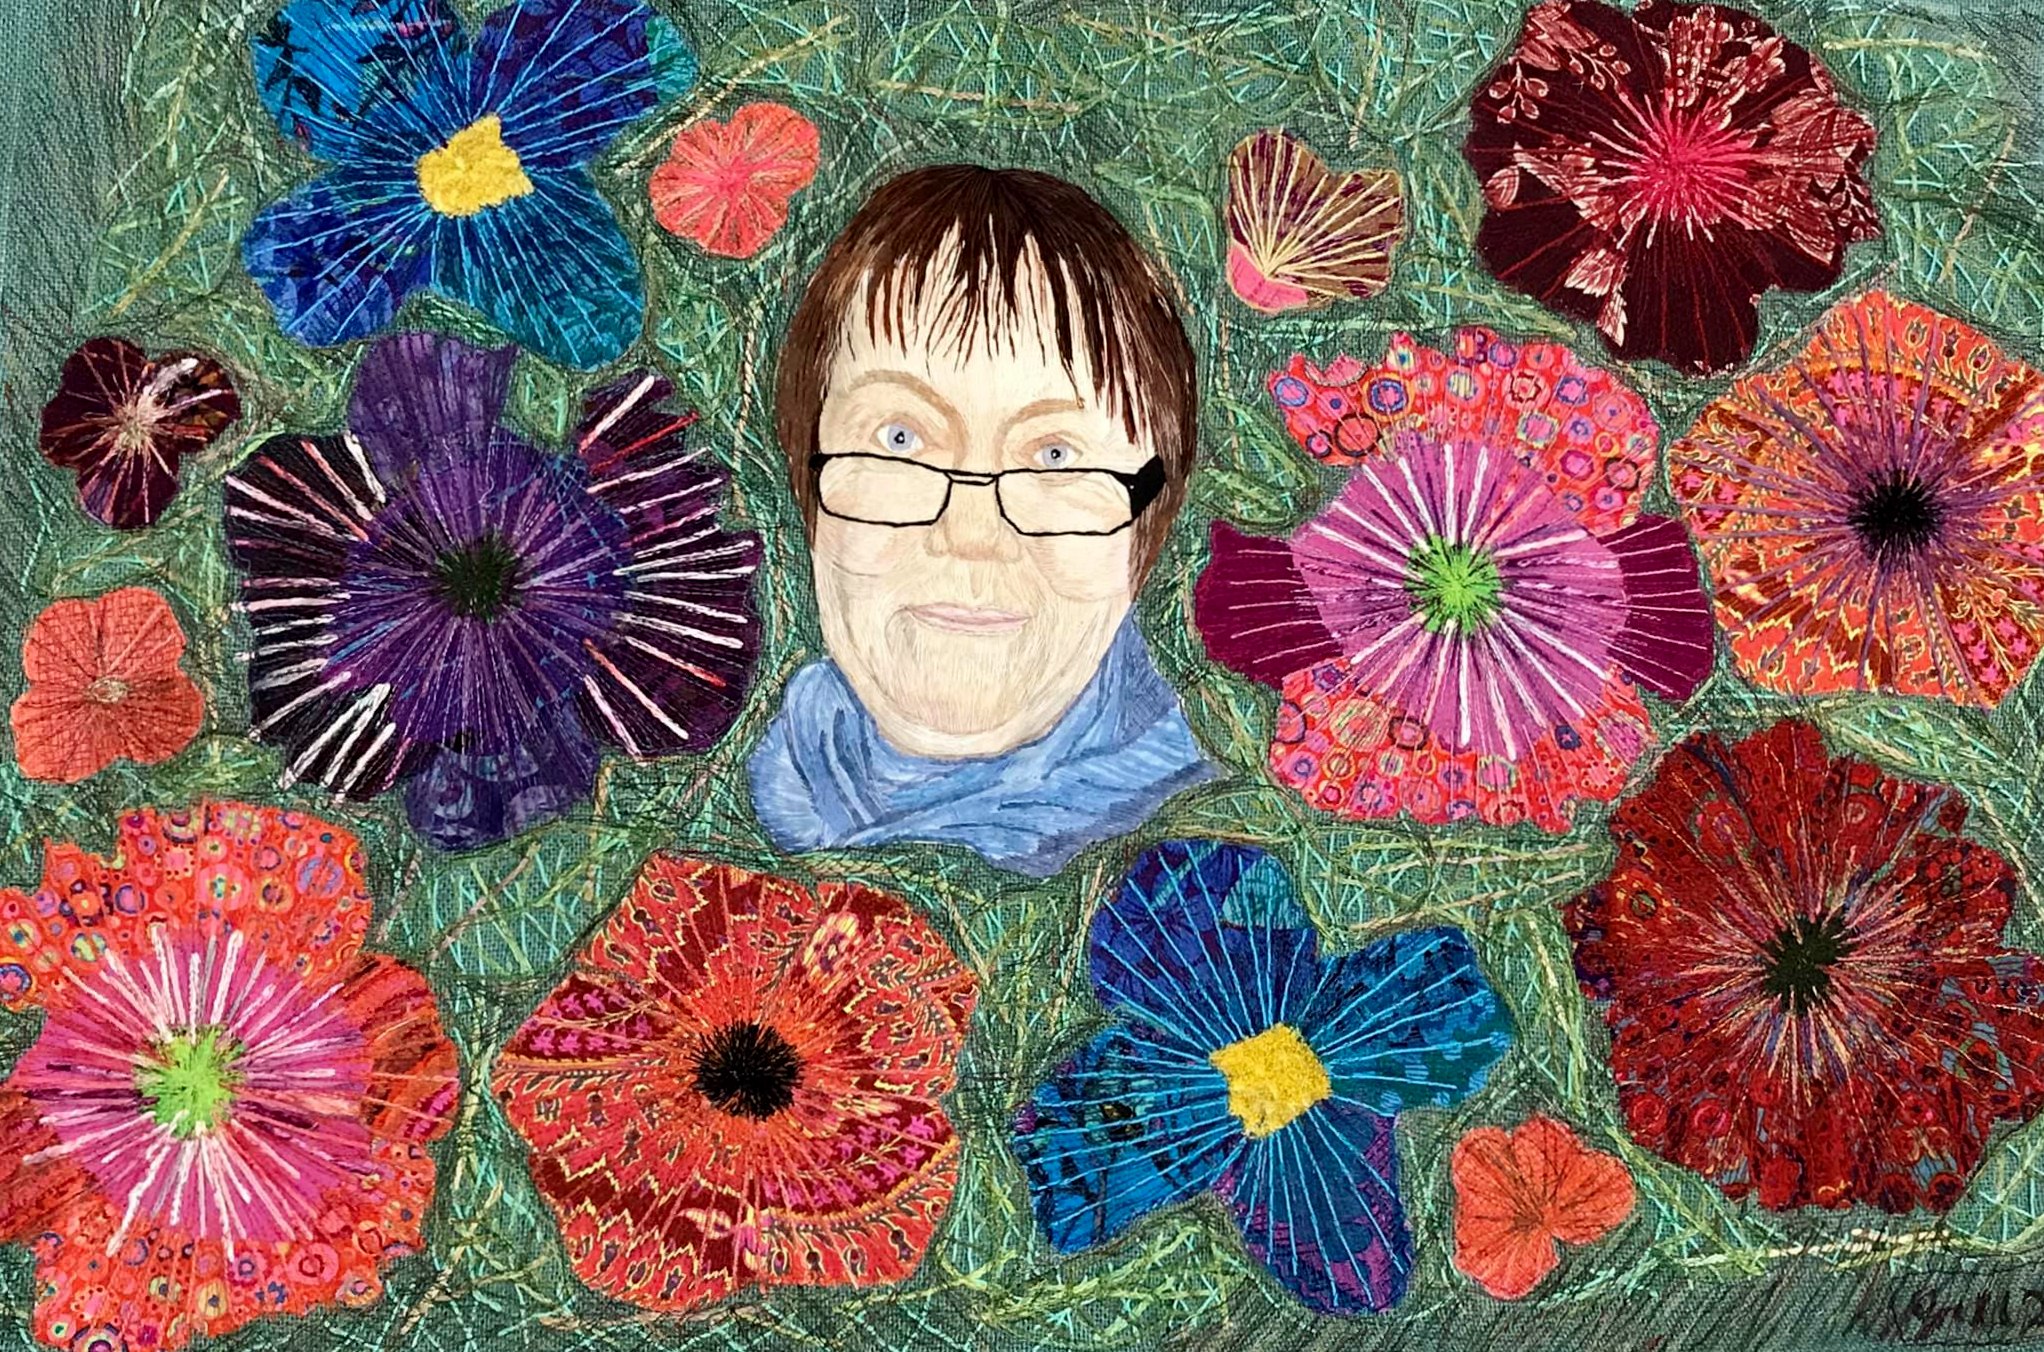 FLOWERS FOR MARIE by Gill Roberts, embroidery 2020